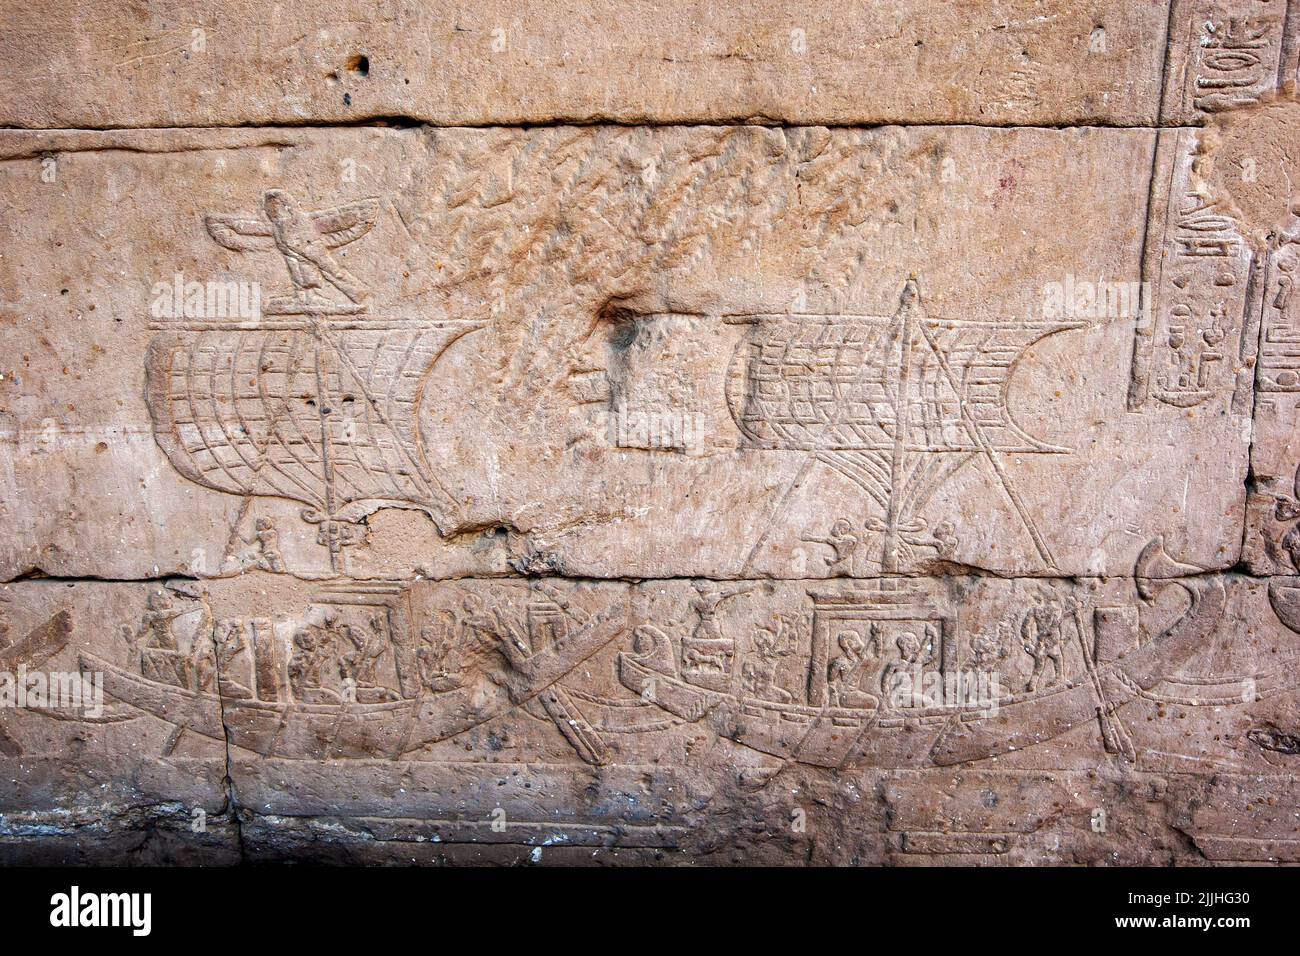 Engraved raised reliefs including sailing boats and hieroglyphics on the pylon wall inside the Temple of Horus at Edfu in central Egypt. Stock Photo